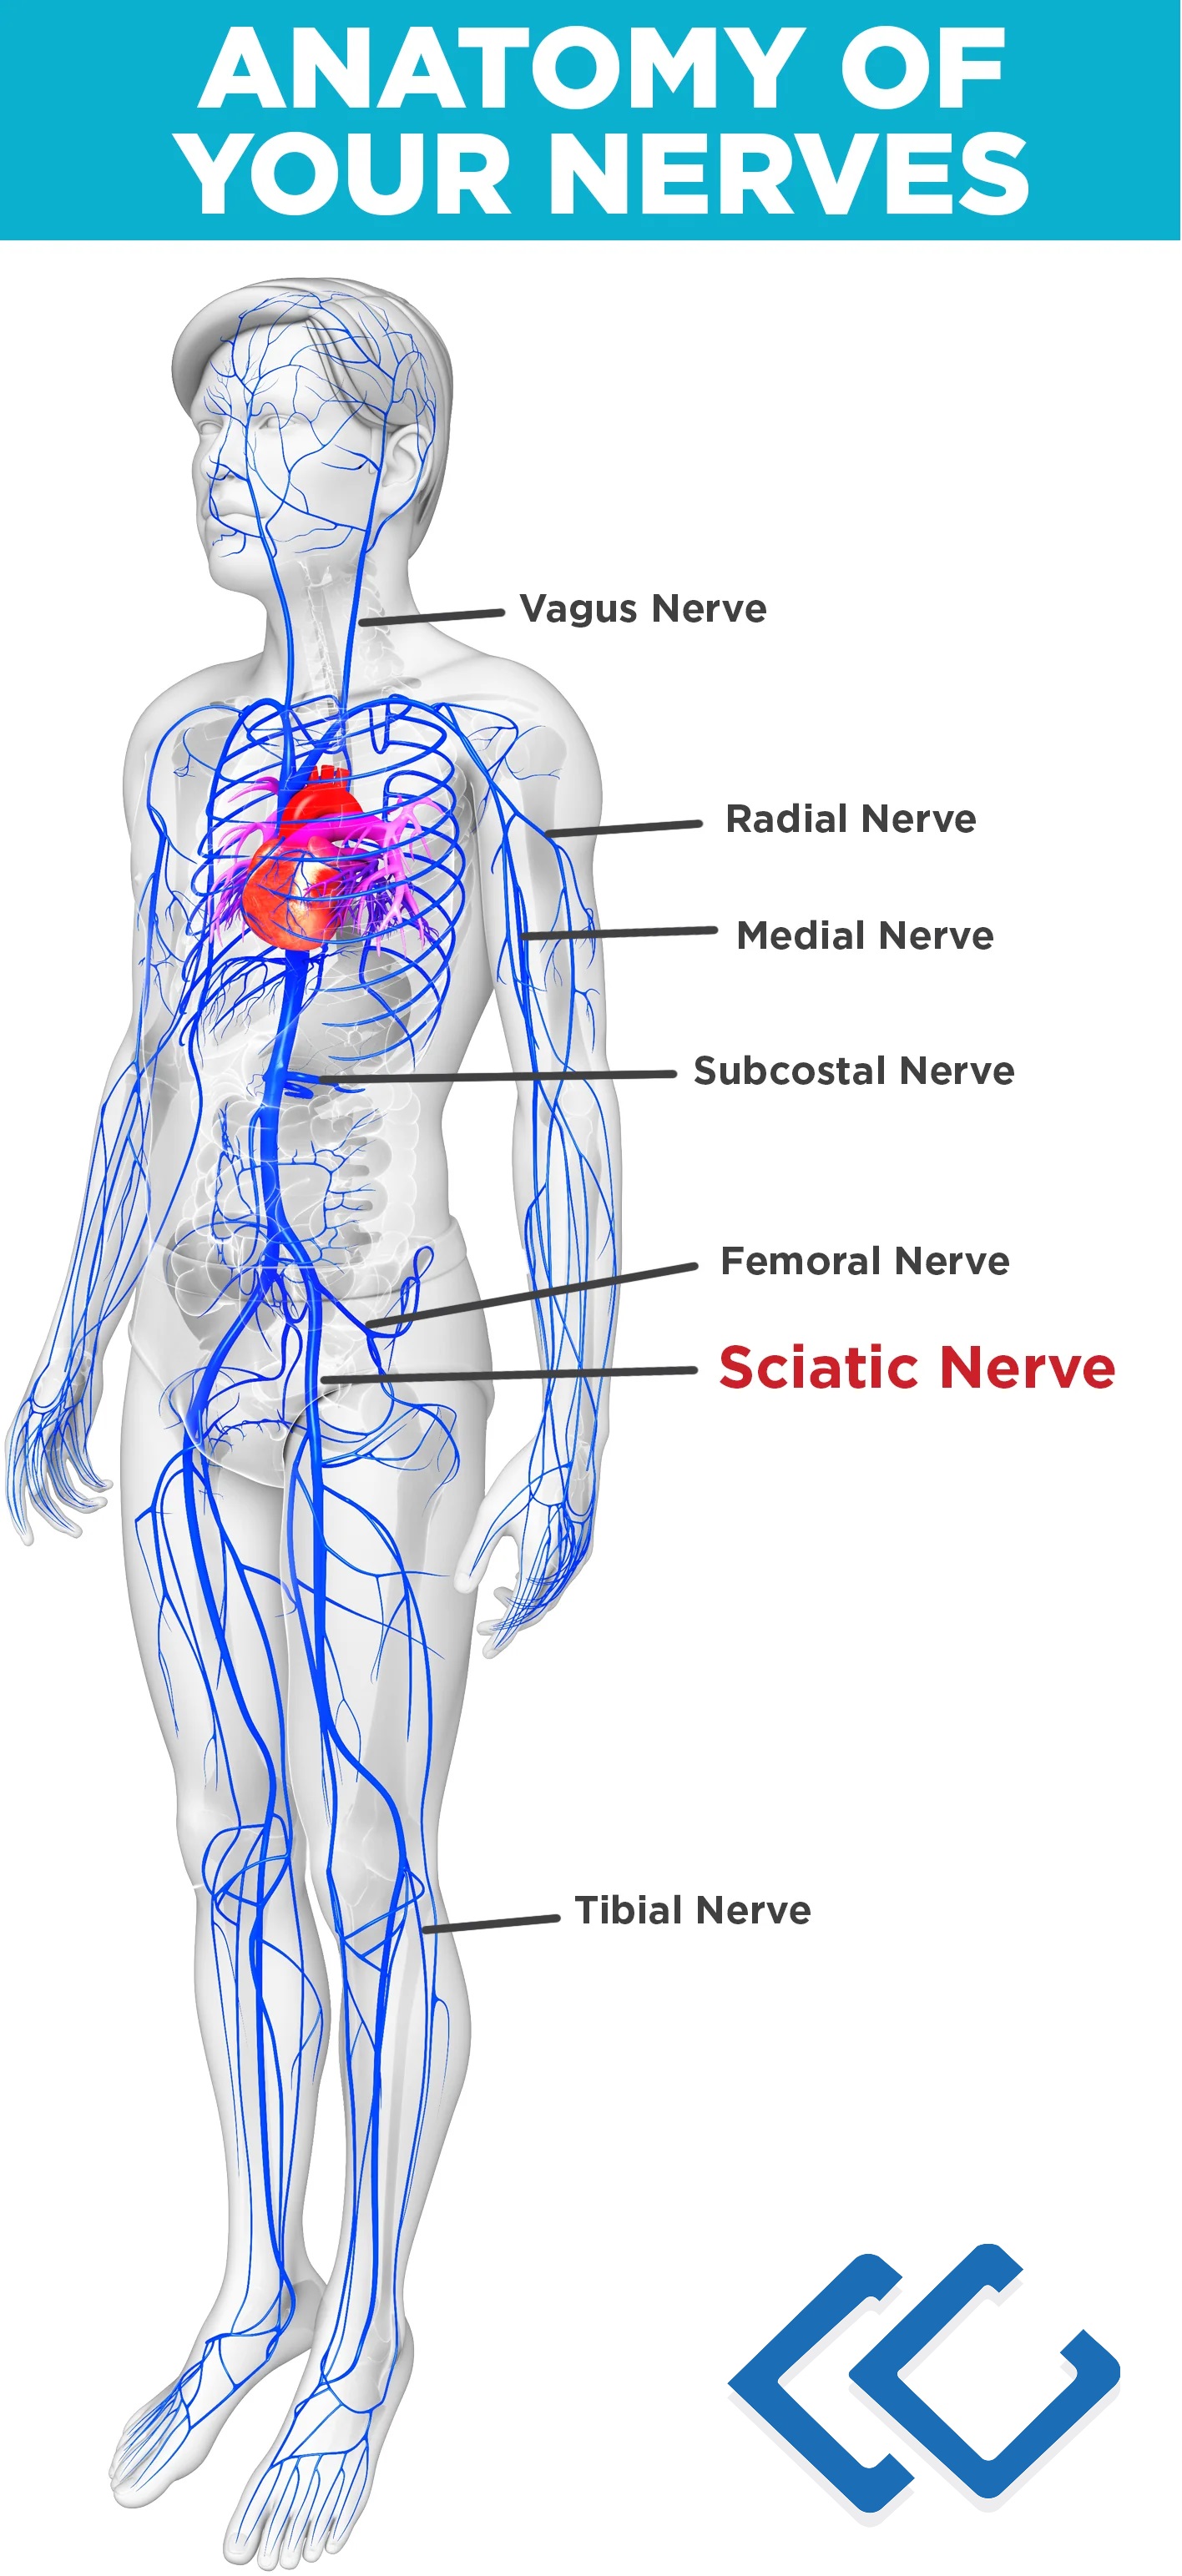 Anatomy of Nerves in Human Body